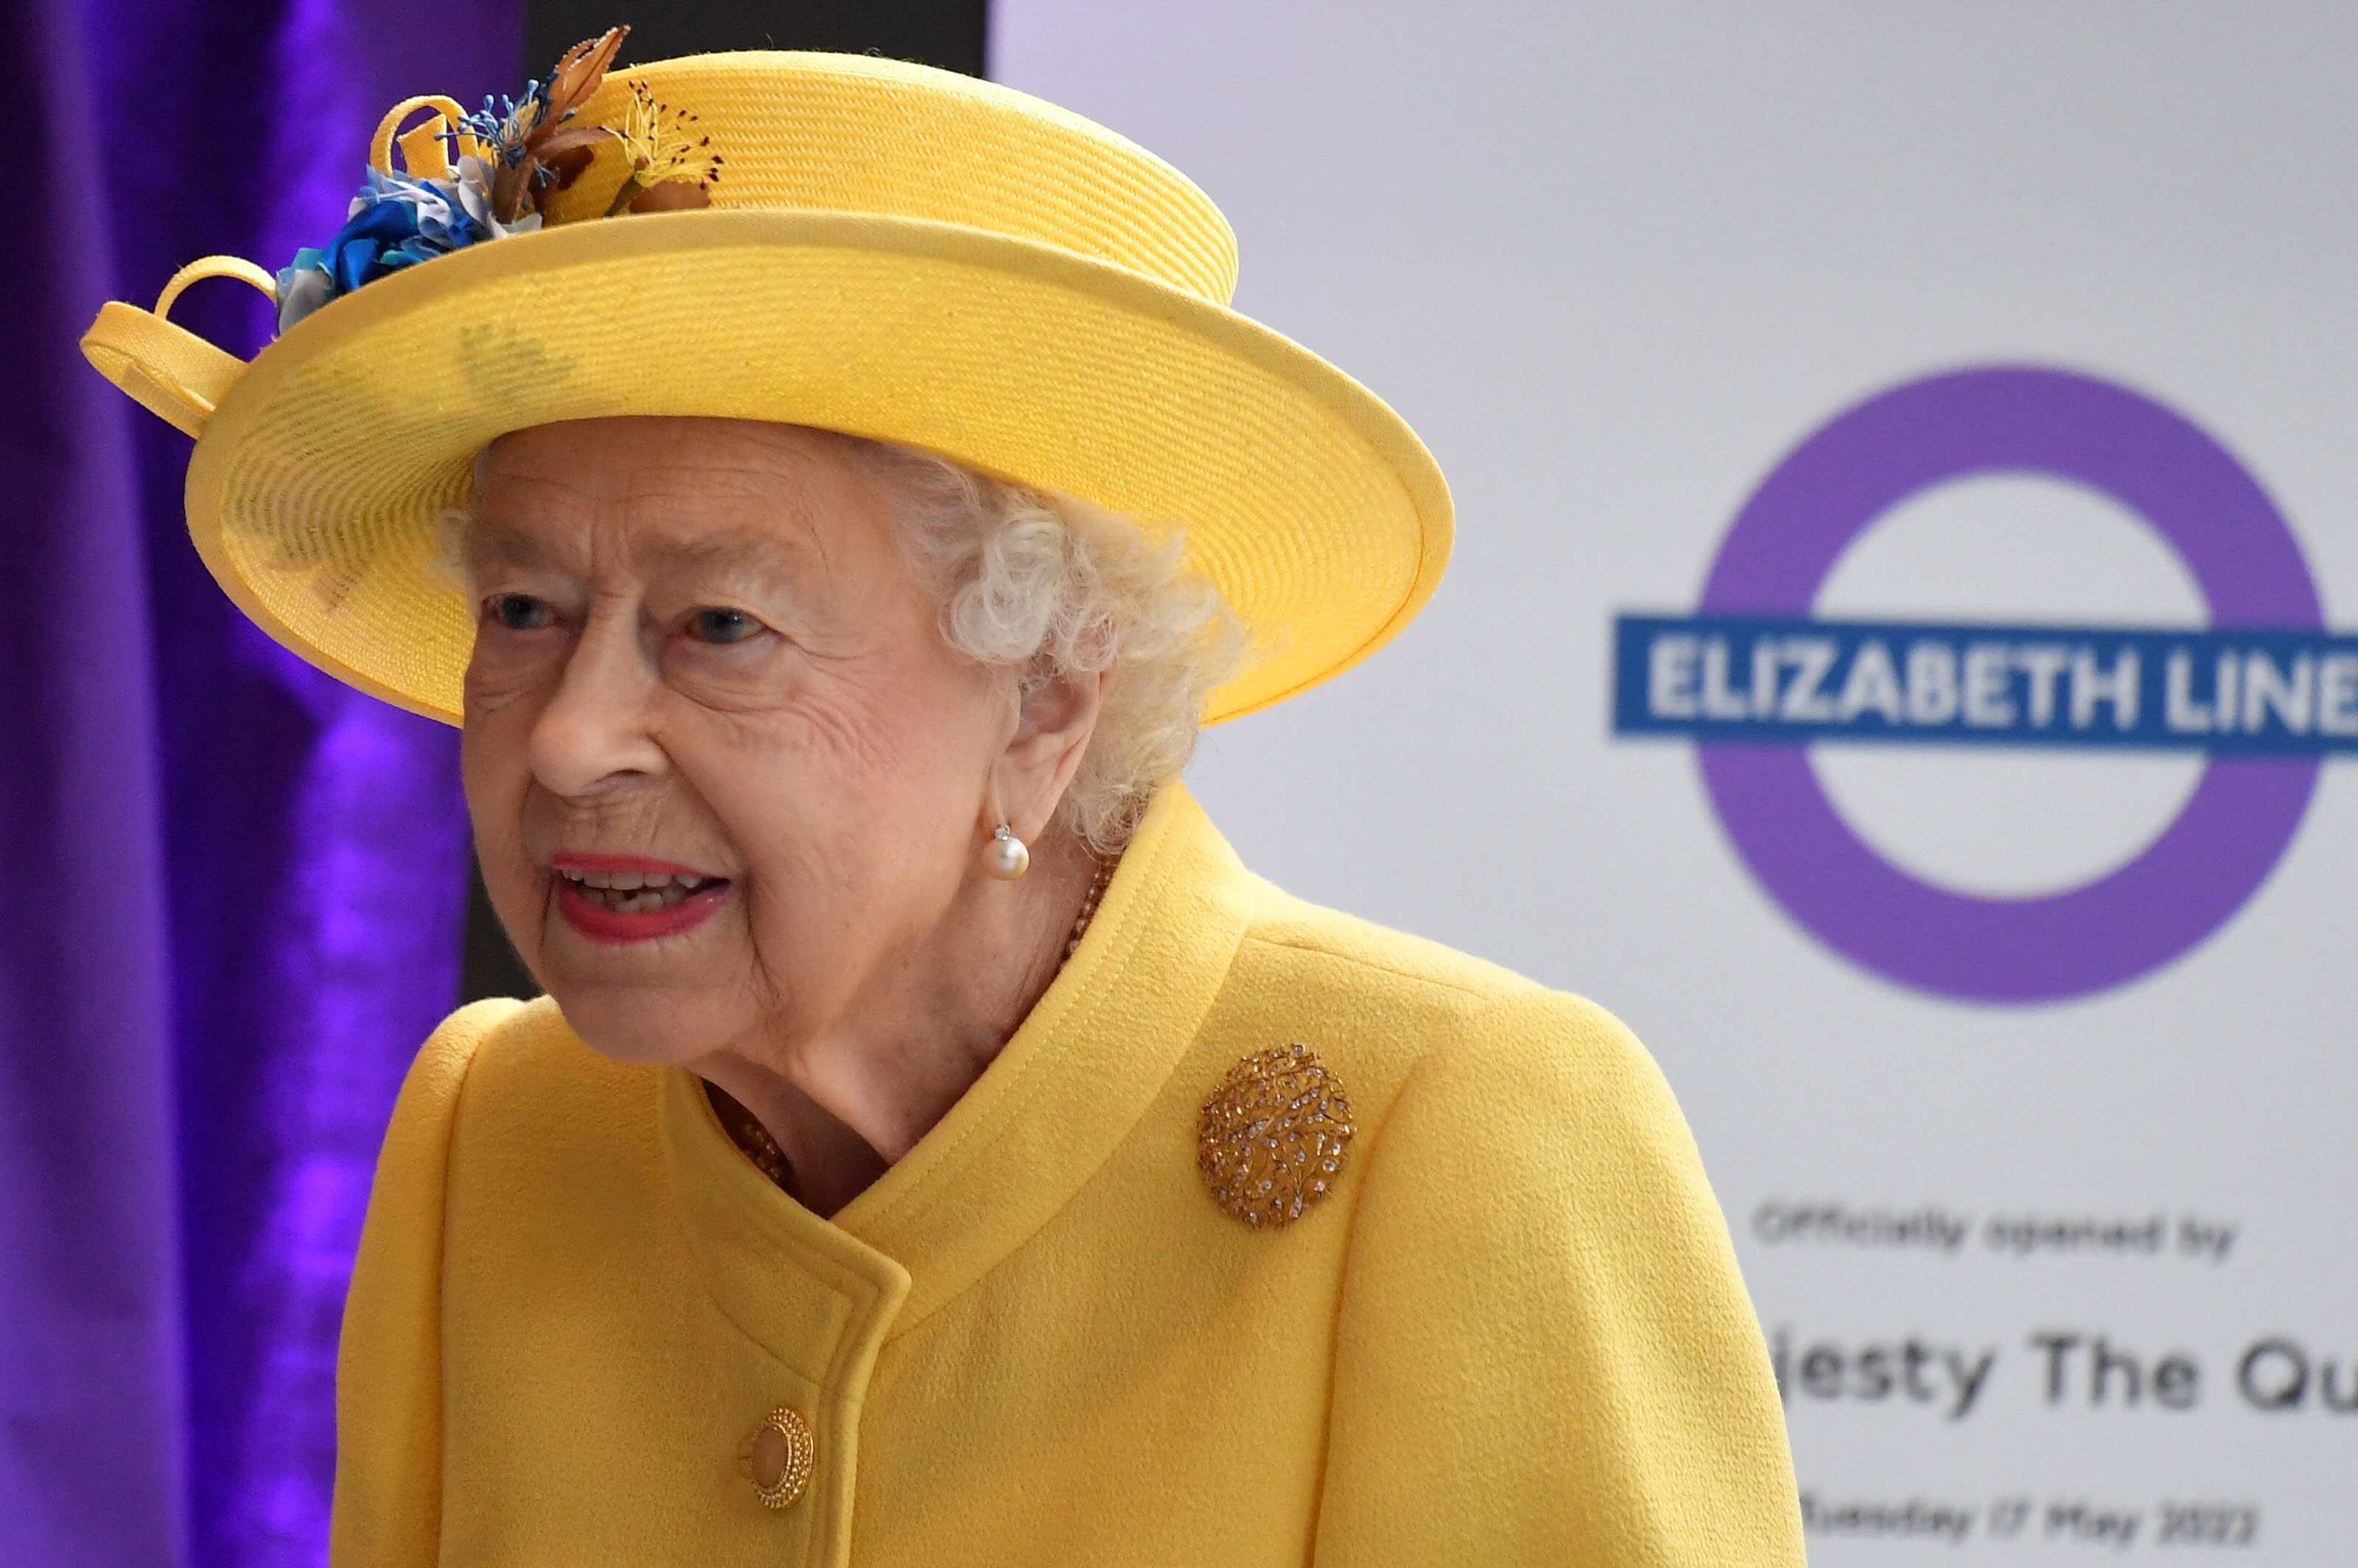 Queen Elizabeth sports 'favourite' brooch designed by Singapore jeweller while opening new railway line in London